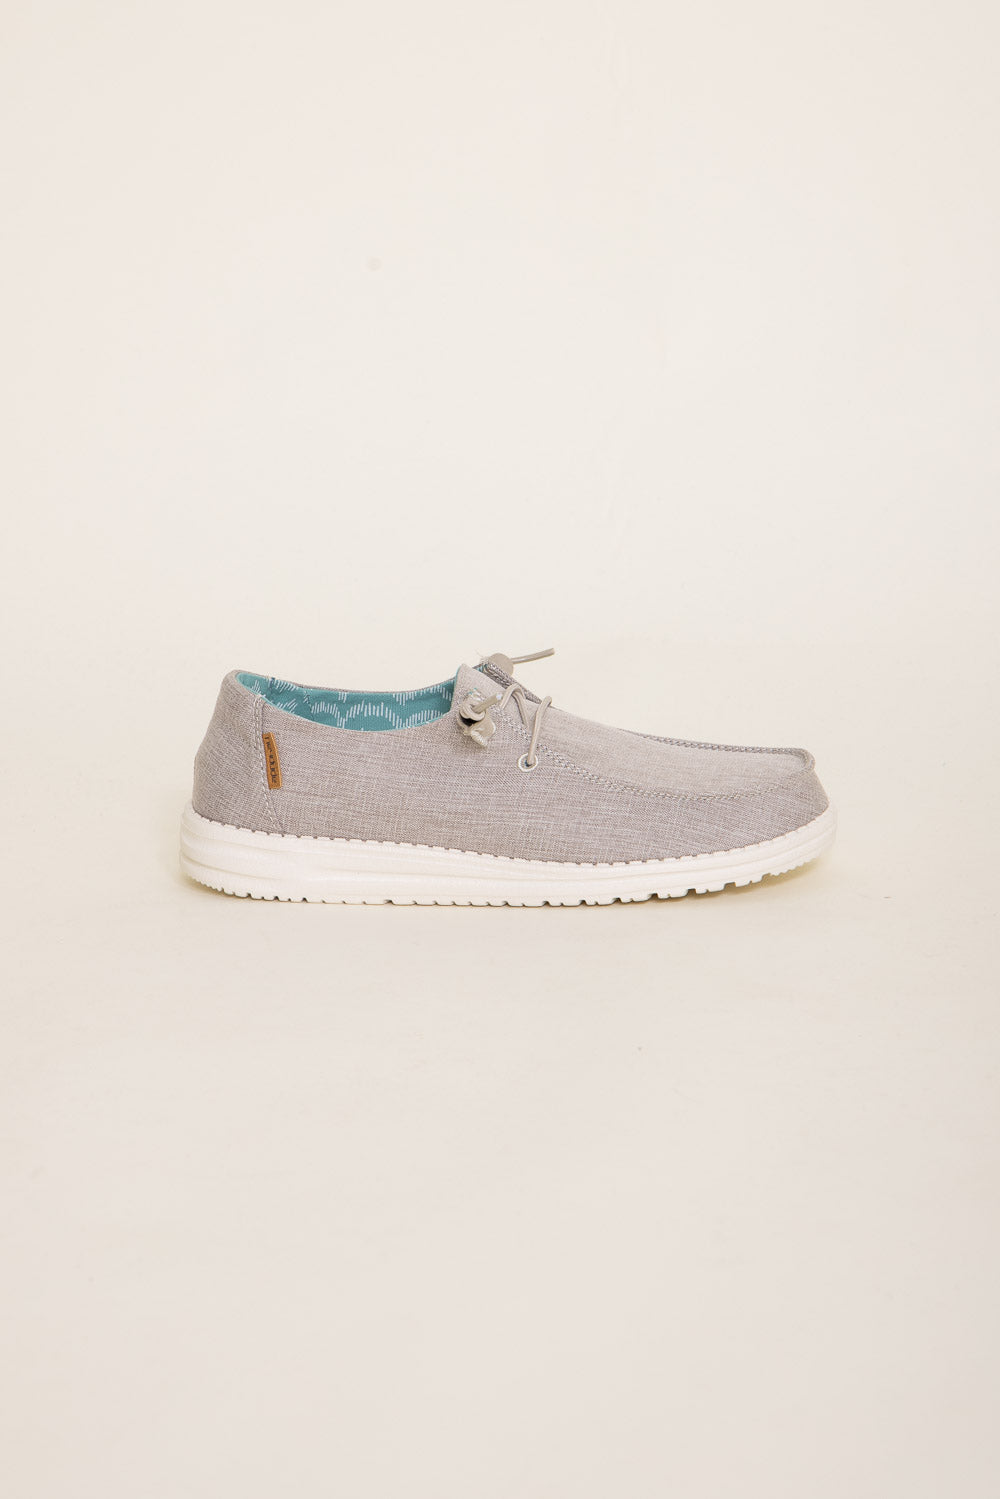 Hey Dude Womens Wendy Linen Chambray White Blue Casual Shoes